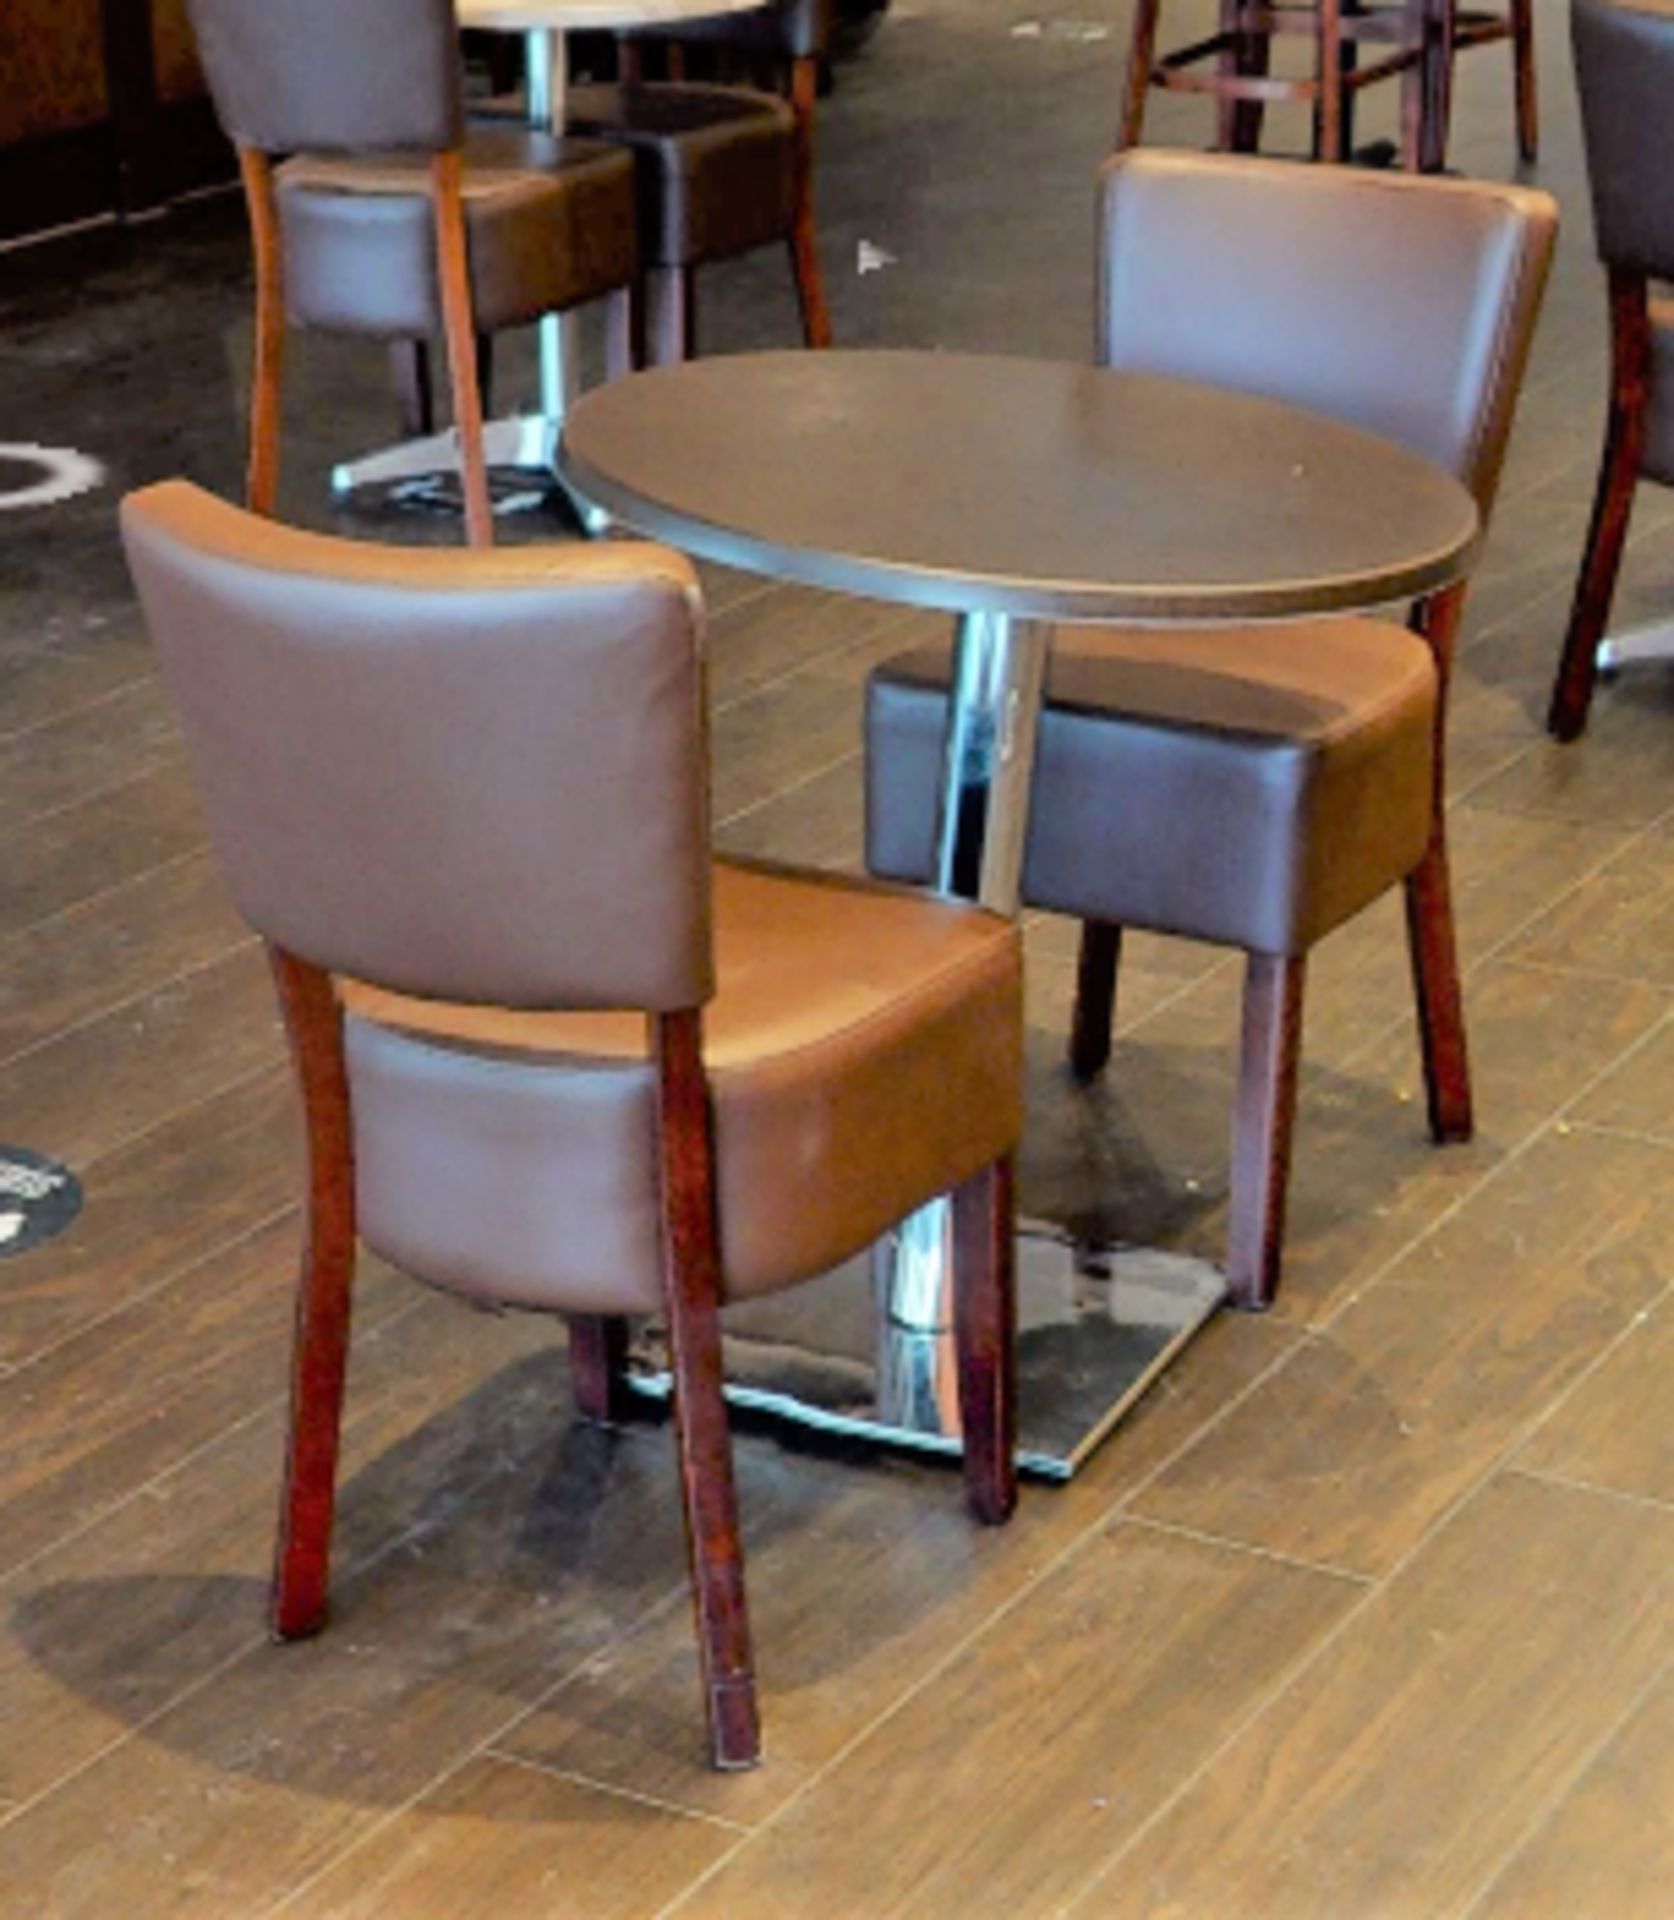 4 x Restaurant Chairs With Brown Leather Seat Pads and Padded Backrests - CL701 - Location: Ashton - Image 5 of 9